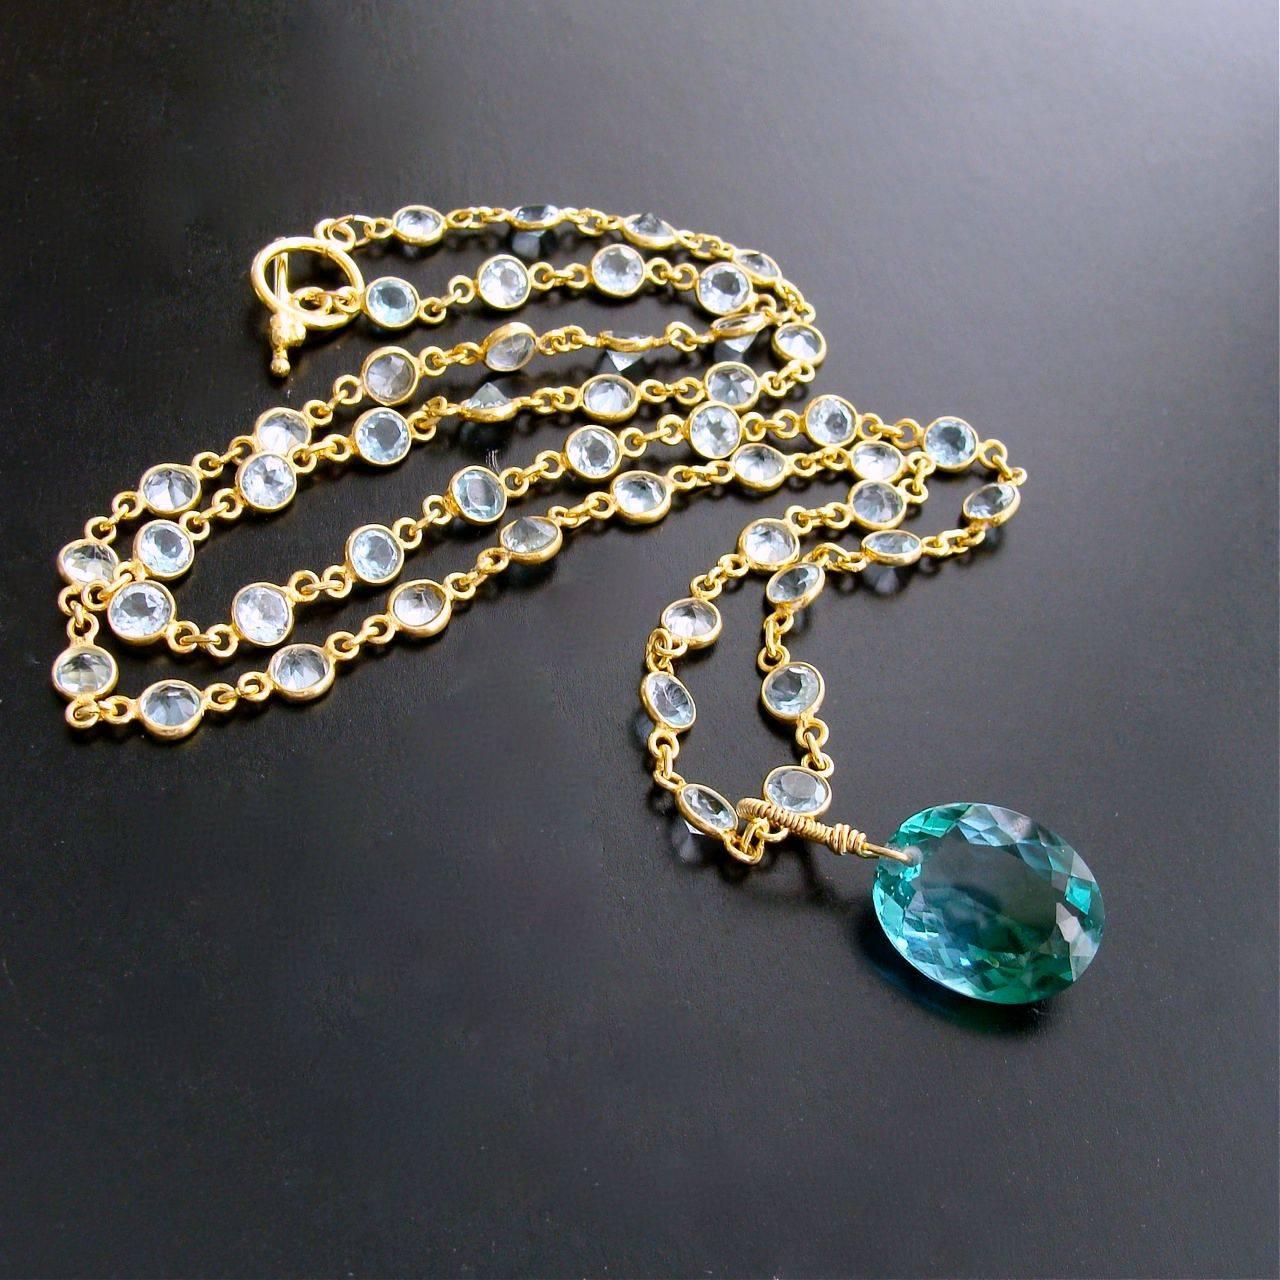 Bella II Necklace.

Looking for just a dash of sparkle in a gorgeous aqua color range?  This stunning 16 carat bi-color Bolivian blue green ametrine has sparkle galore and a stunning ombre range of colors from vivid topaz blue to forest green. 